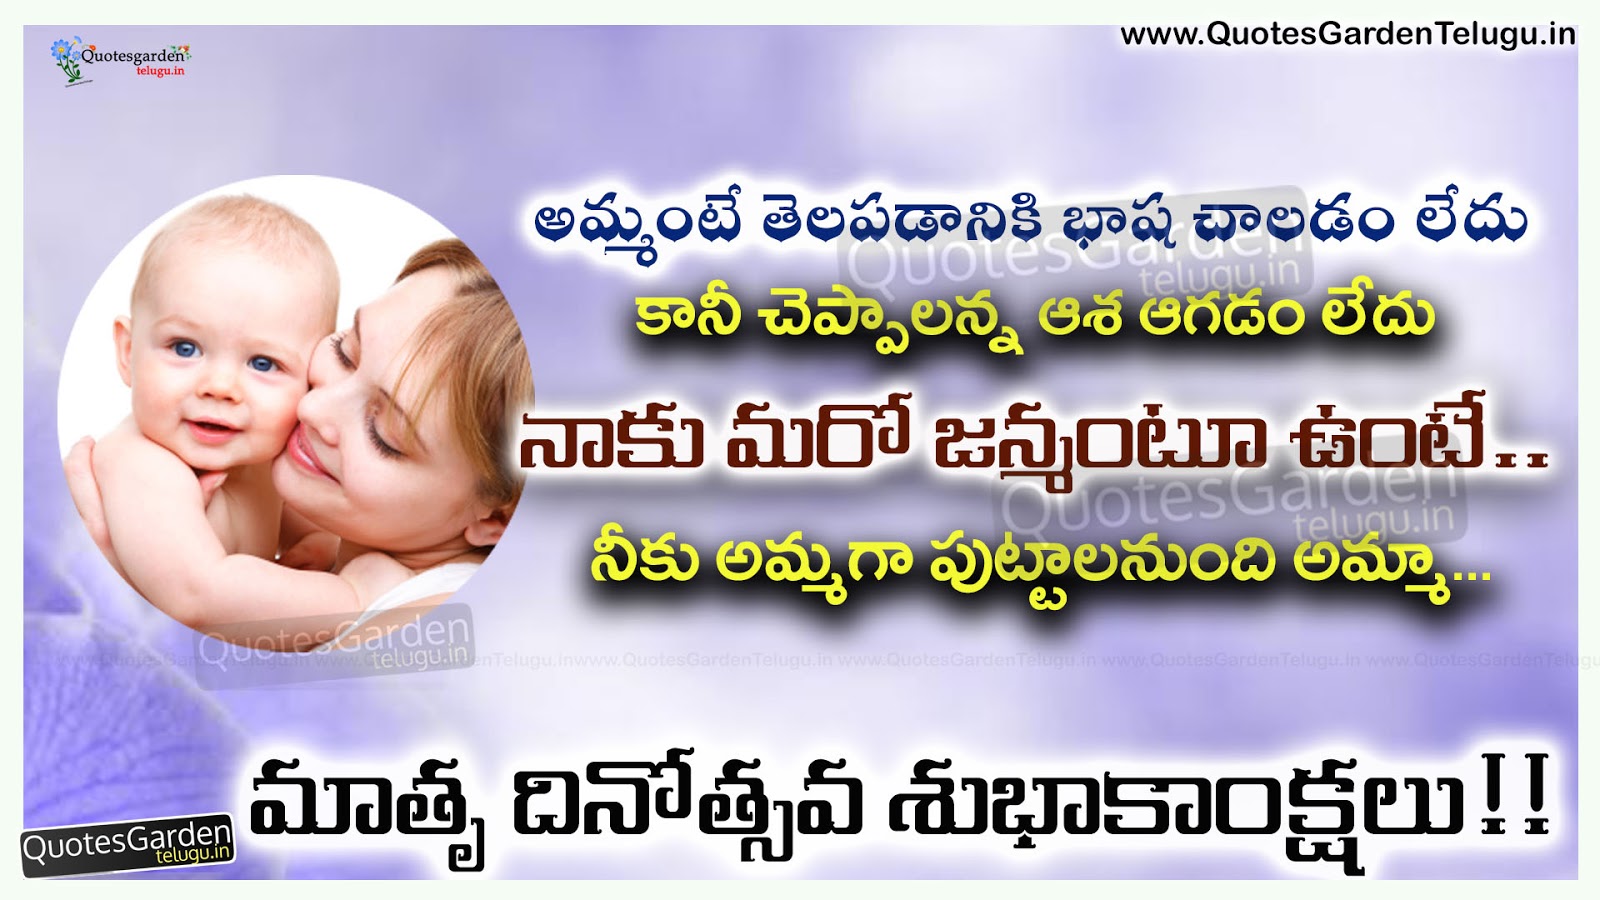 Mothers Day images telugu greetings quotes